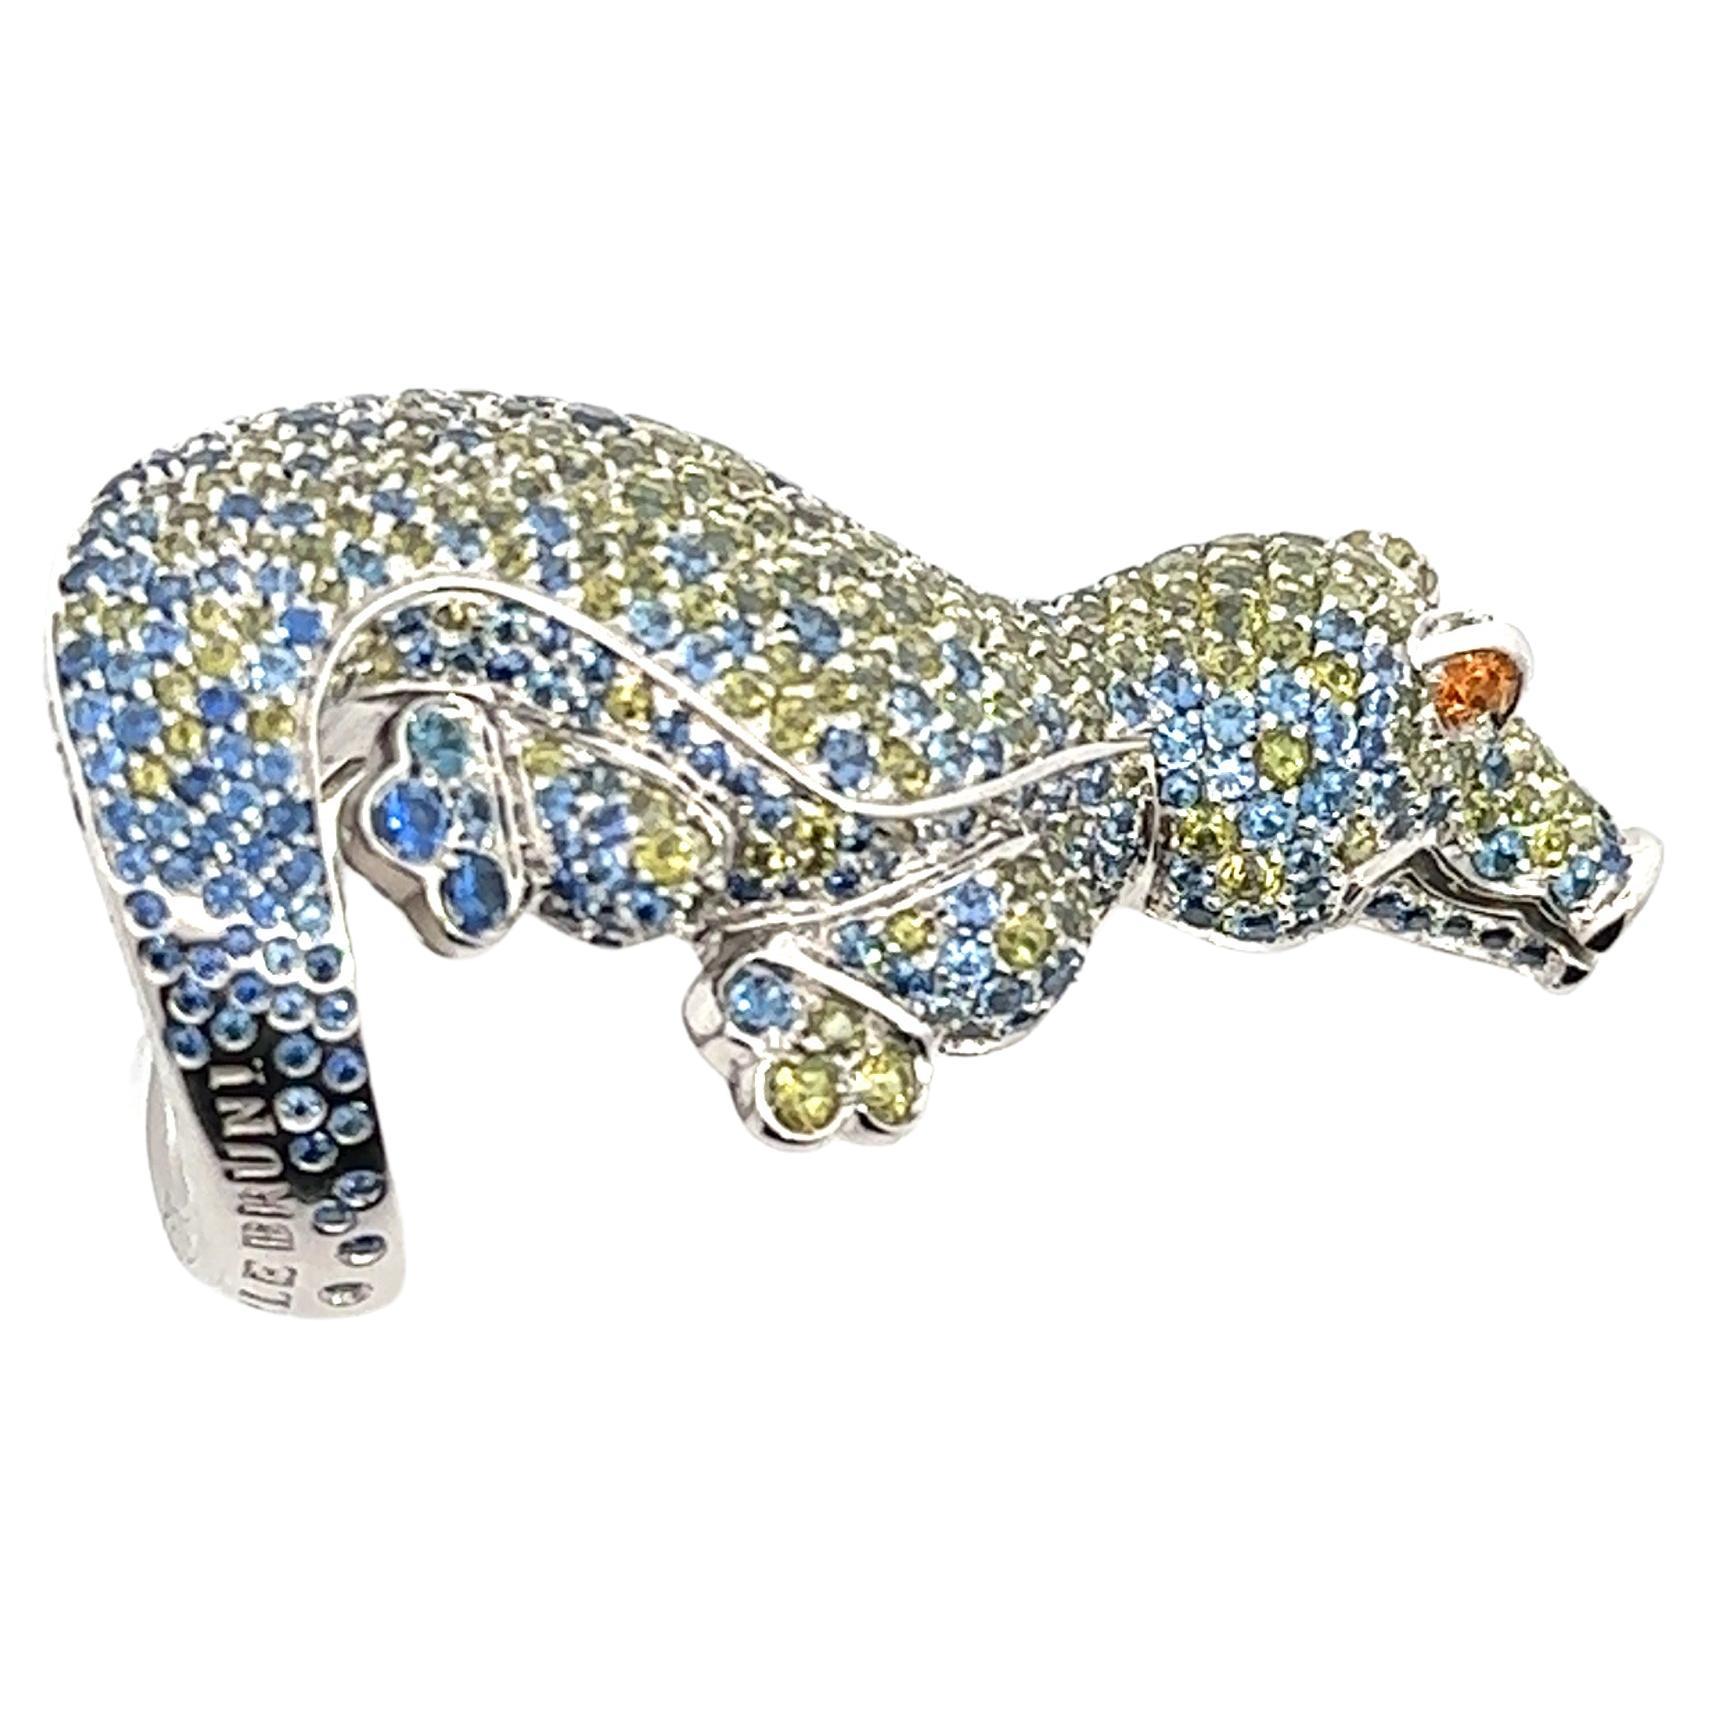 Pasquale Bruni 'Pensiero D’Africa' Sapphire Garnet and Topaz Crocodile Ring For Sale